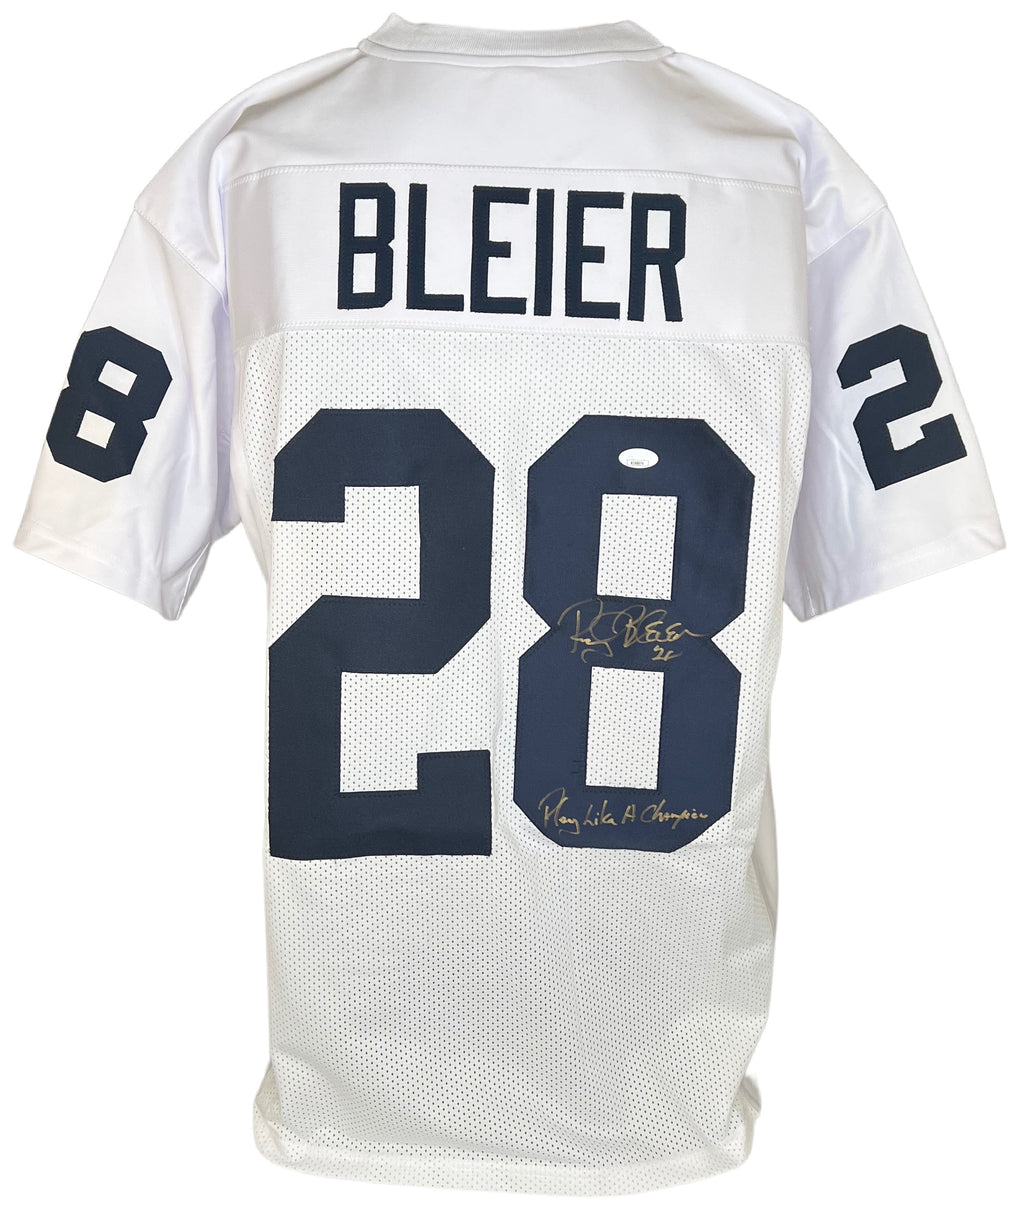 Rocky Bleier autographed signed inscribed College Style jersey PSA